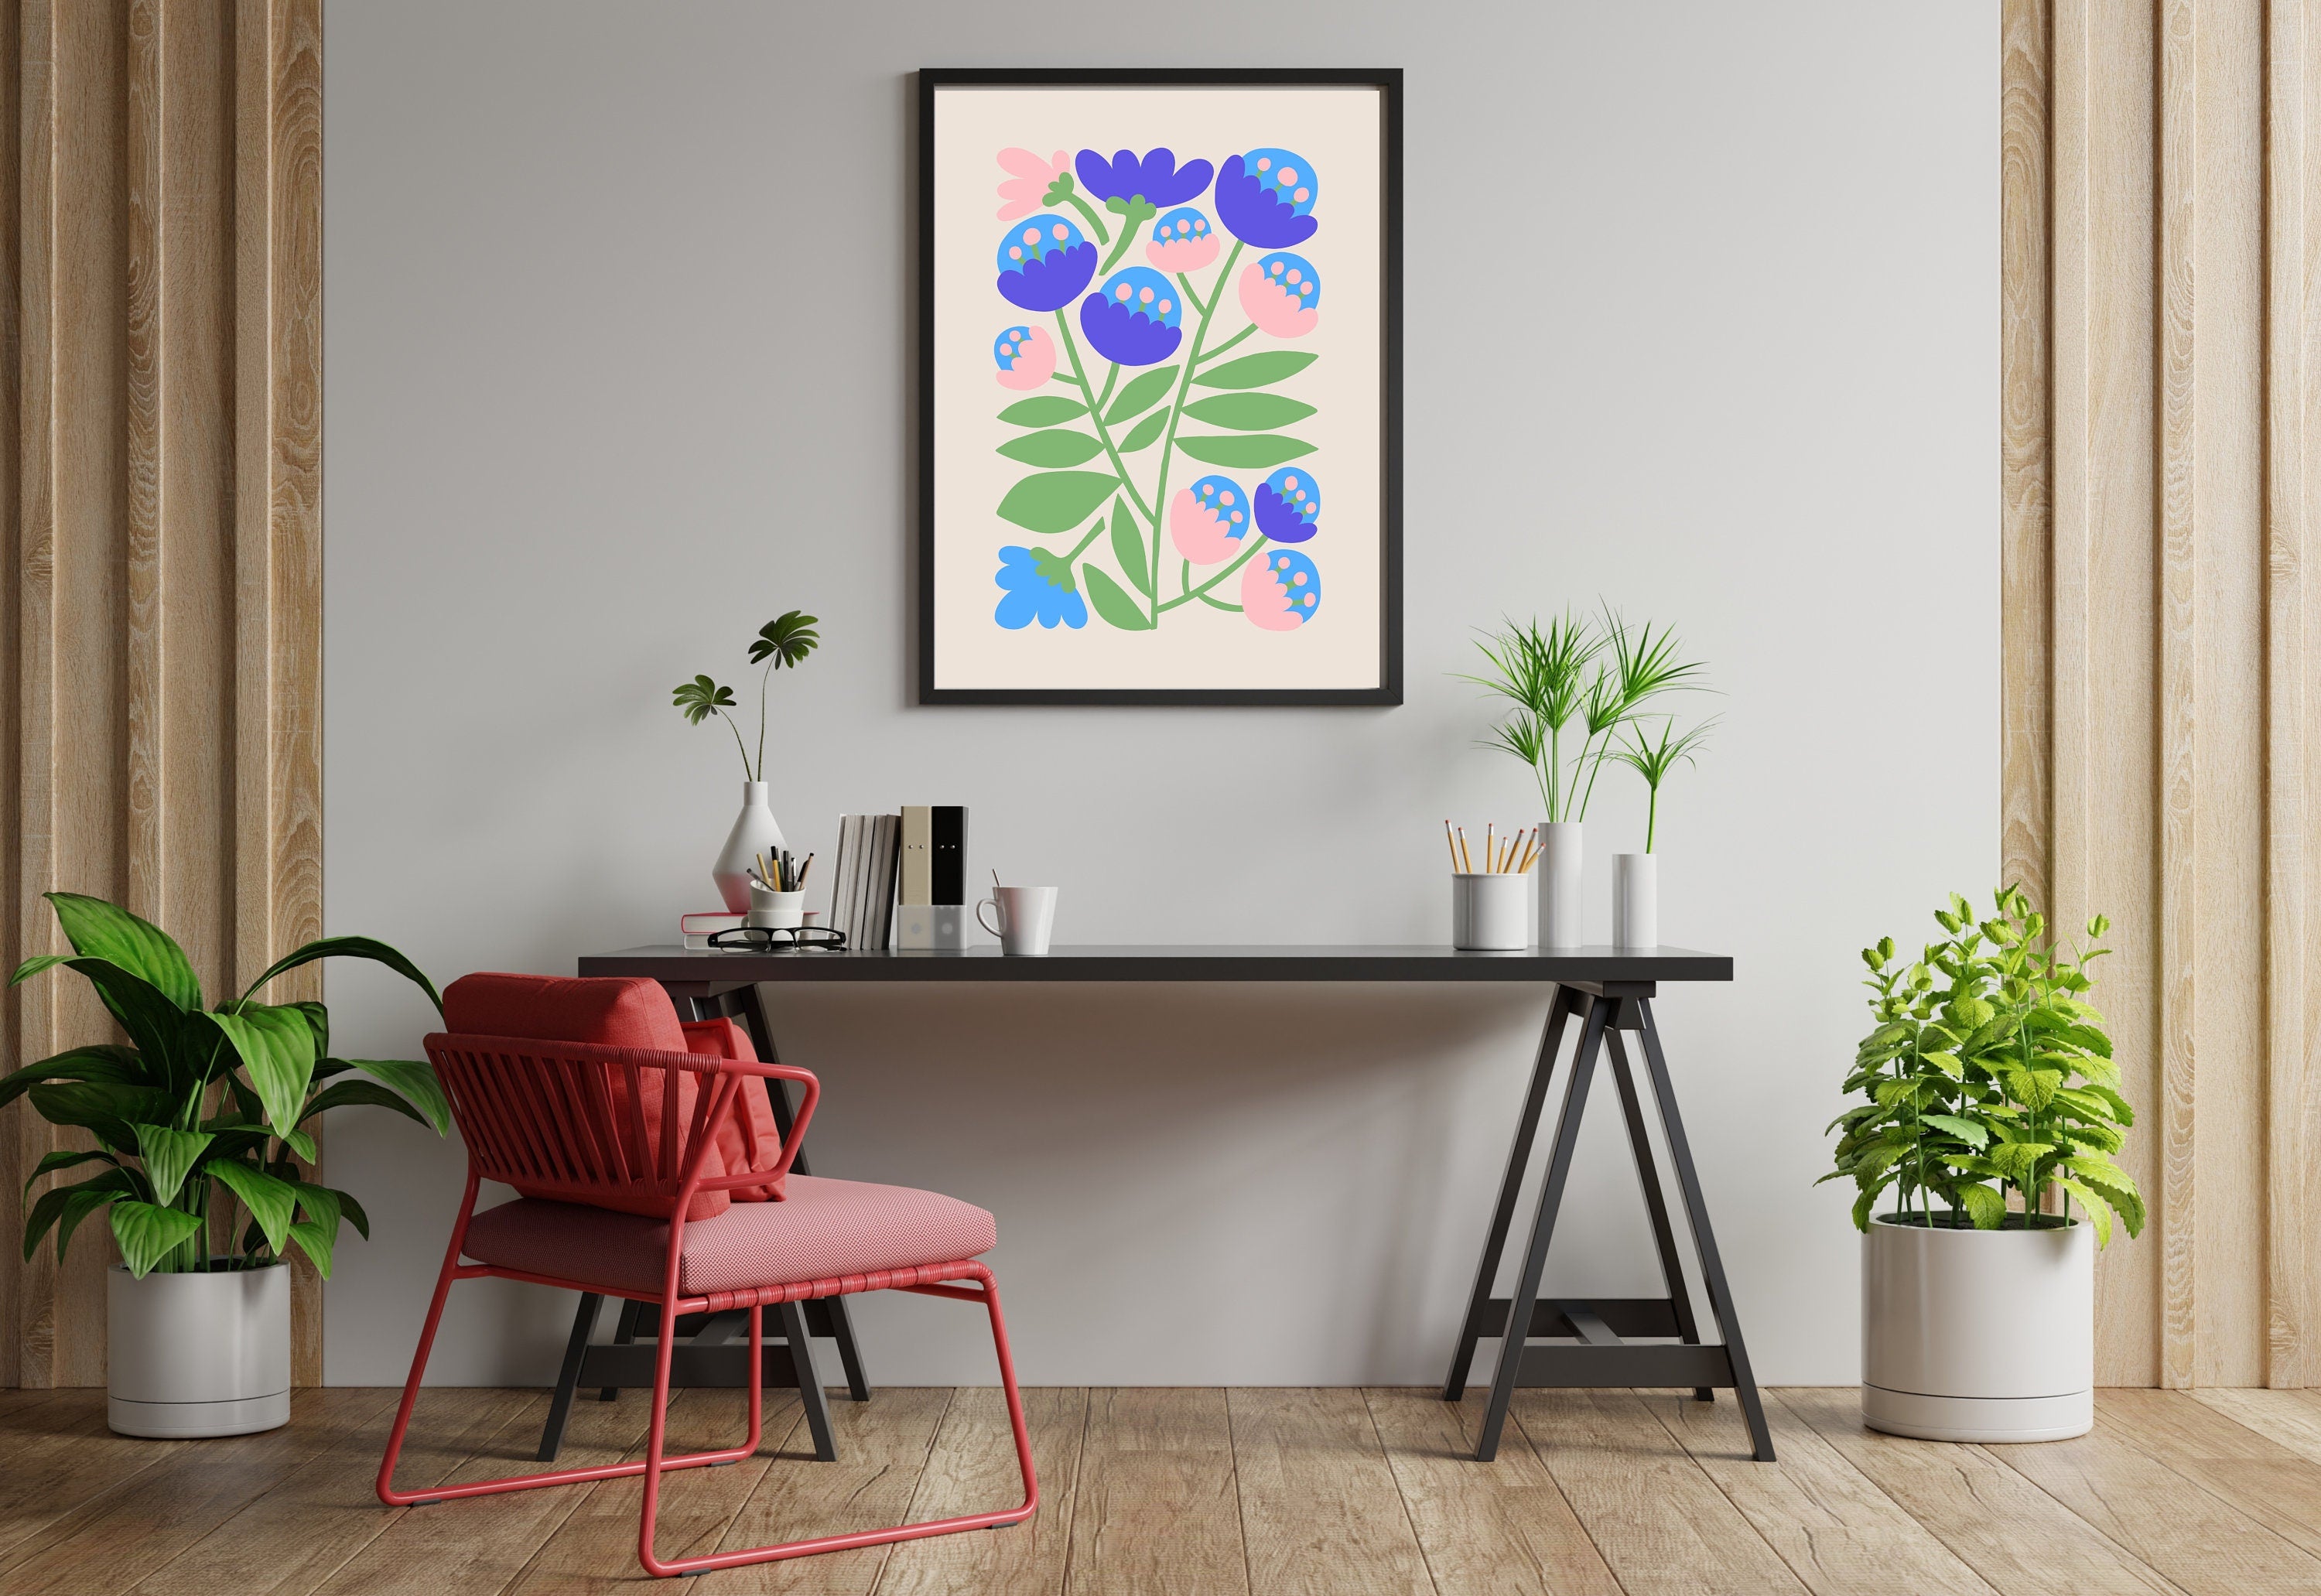 Bring the beauty of nature into your home with this vibrant and cheerful Bouquet of Flowers Digital Art Print from GS Print Shoppe. 